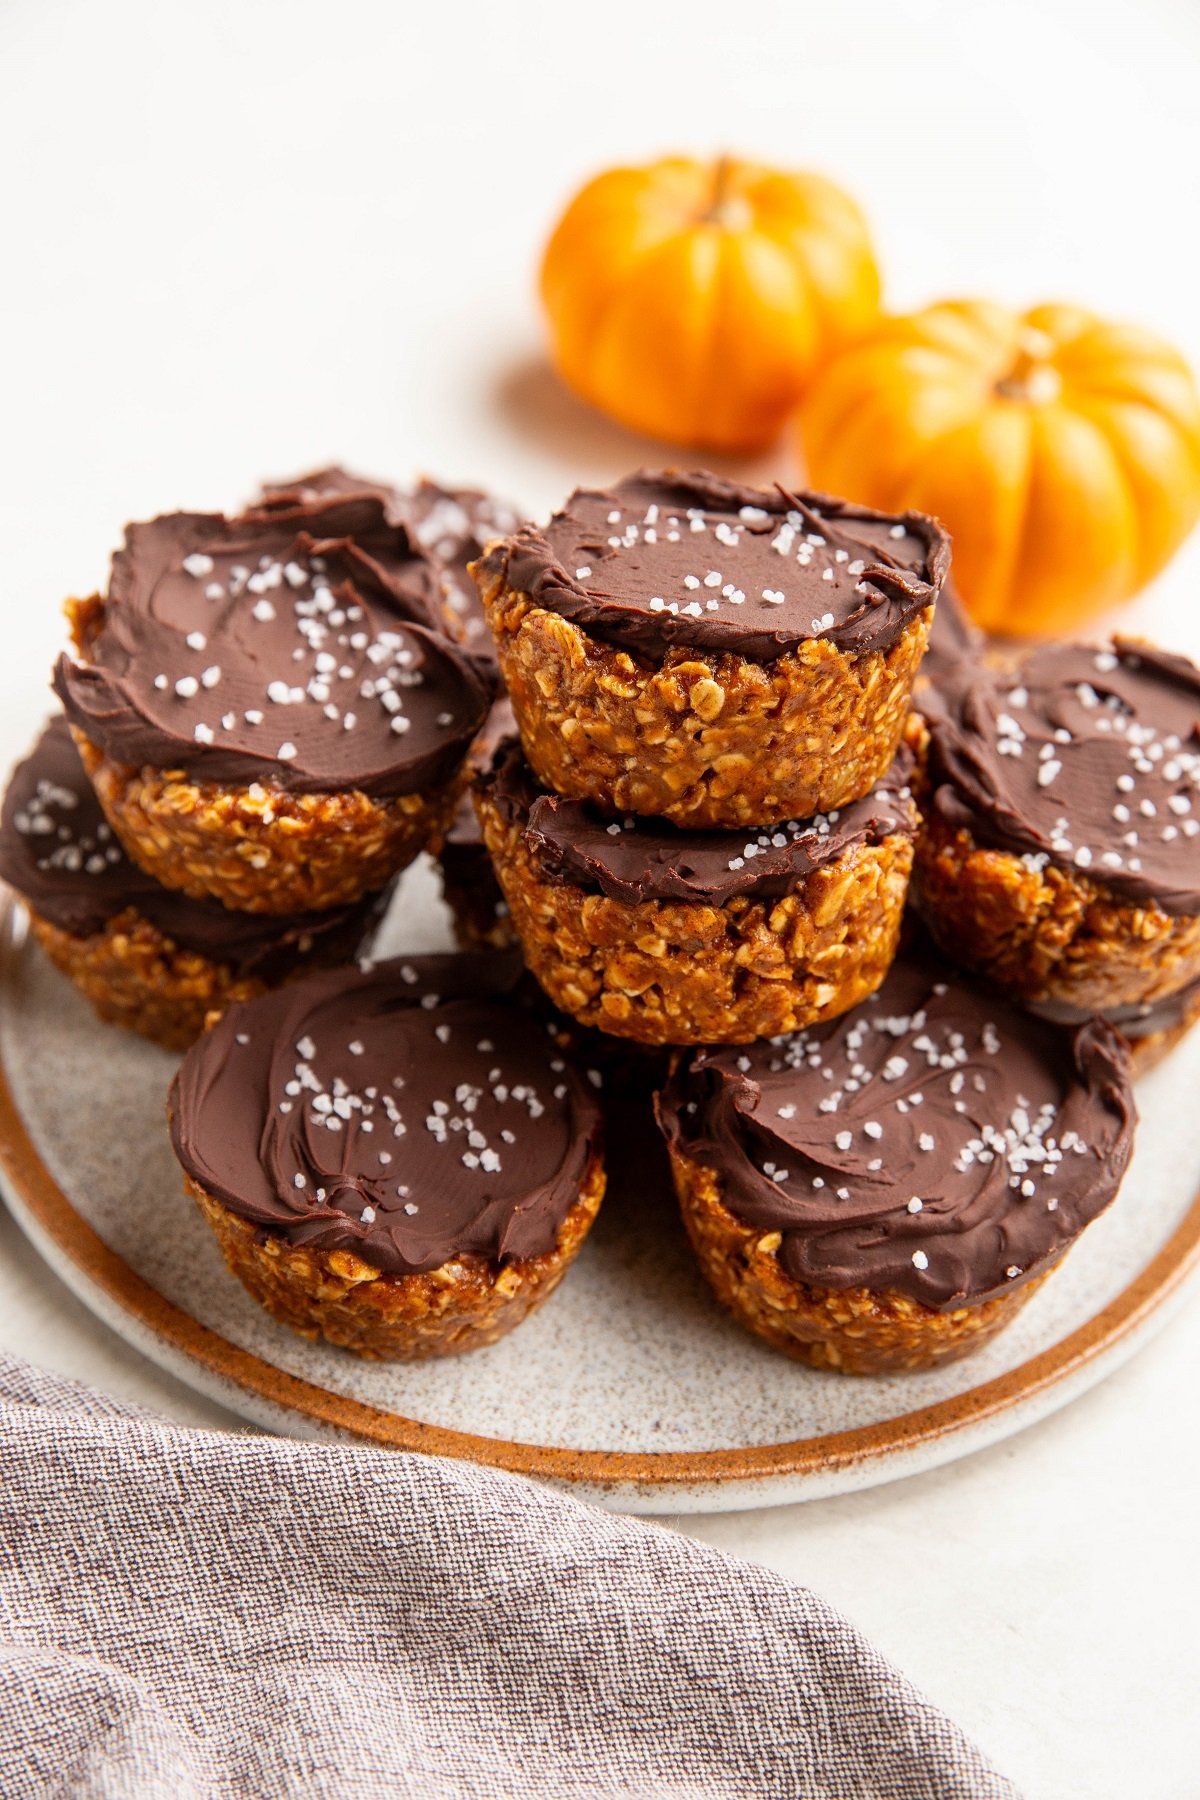 Plate of no-bake pumpkin cups with fresh pumpkins in the background.